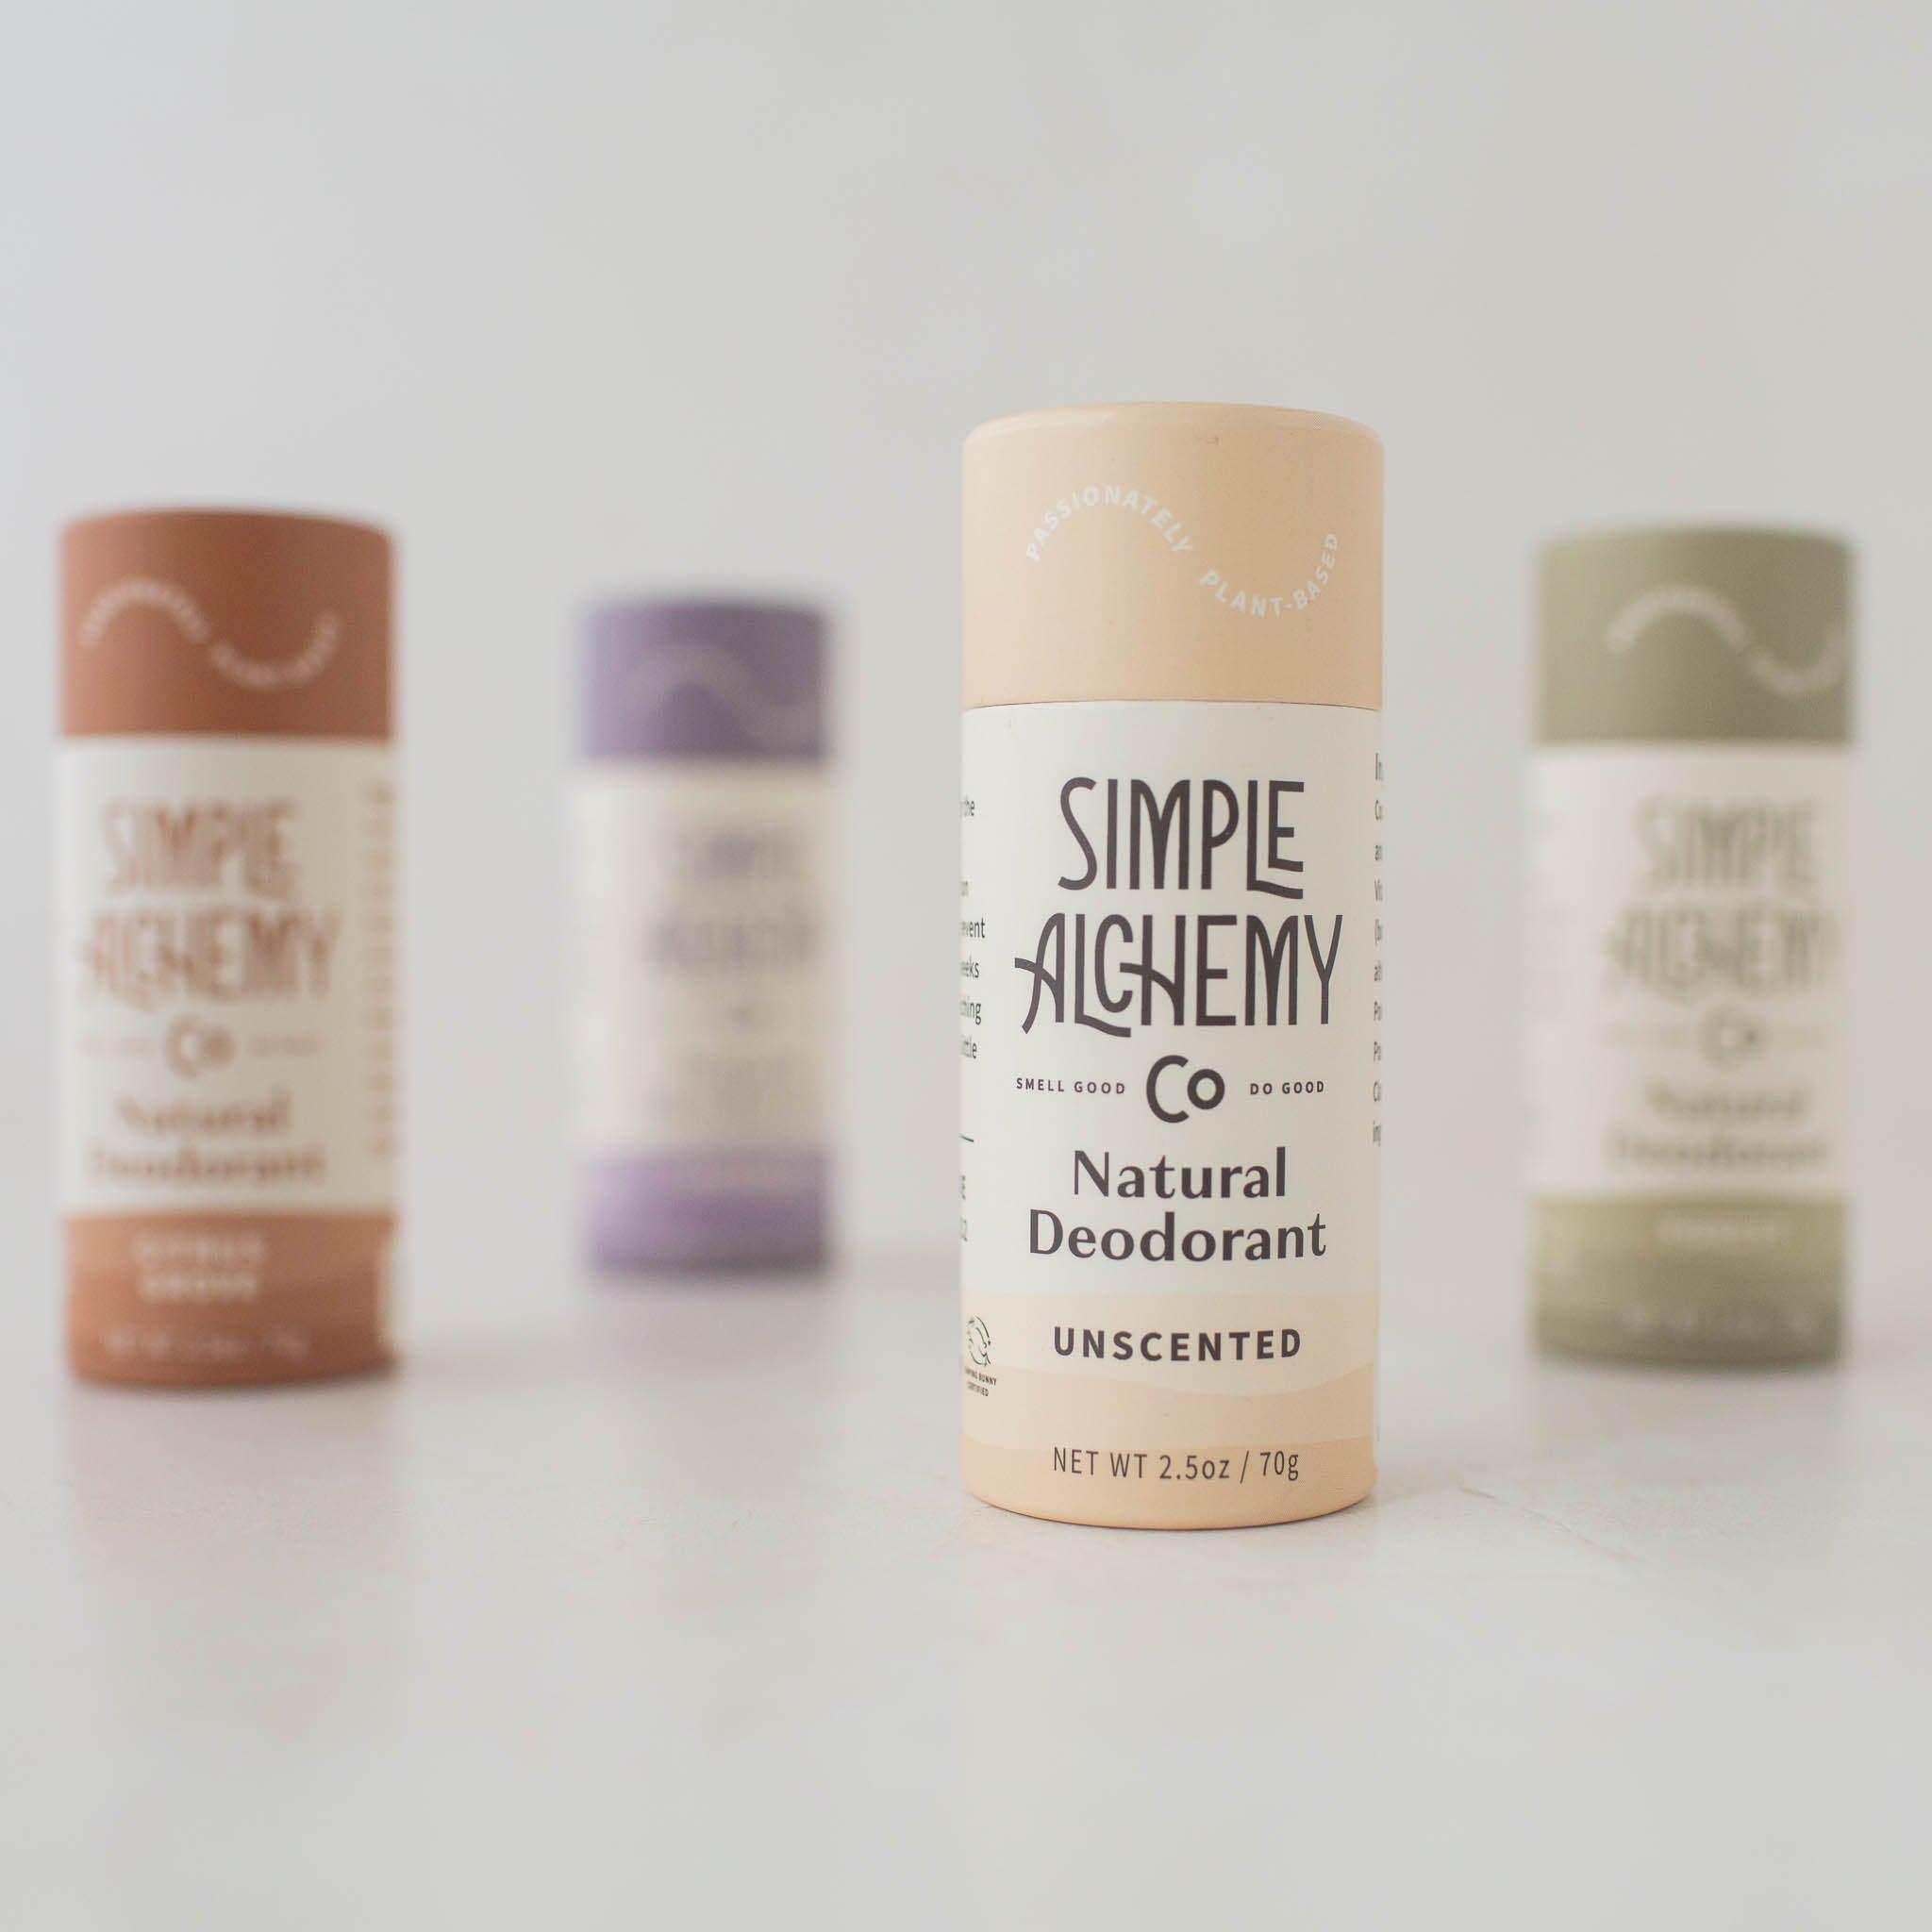 Cream colored compostable paper push-up tube of Unscented Natural Deodorant shown with other scents.